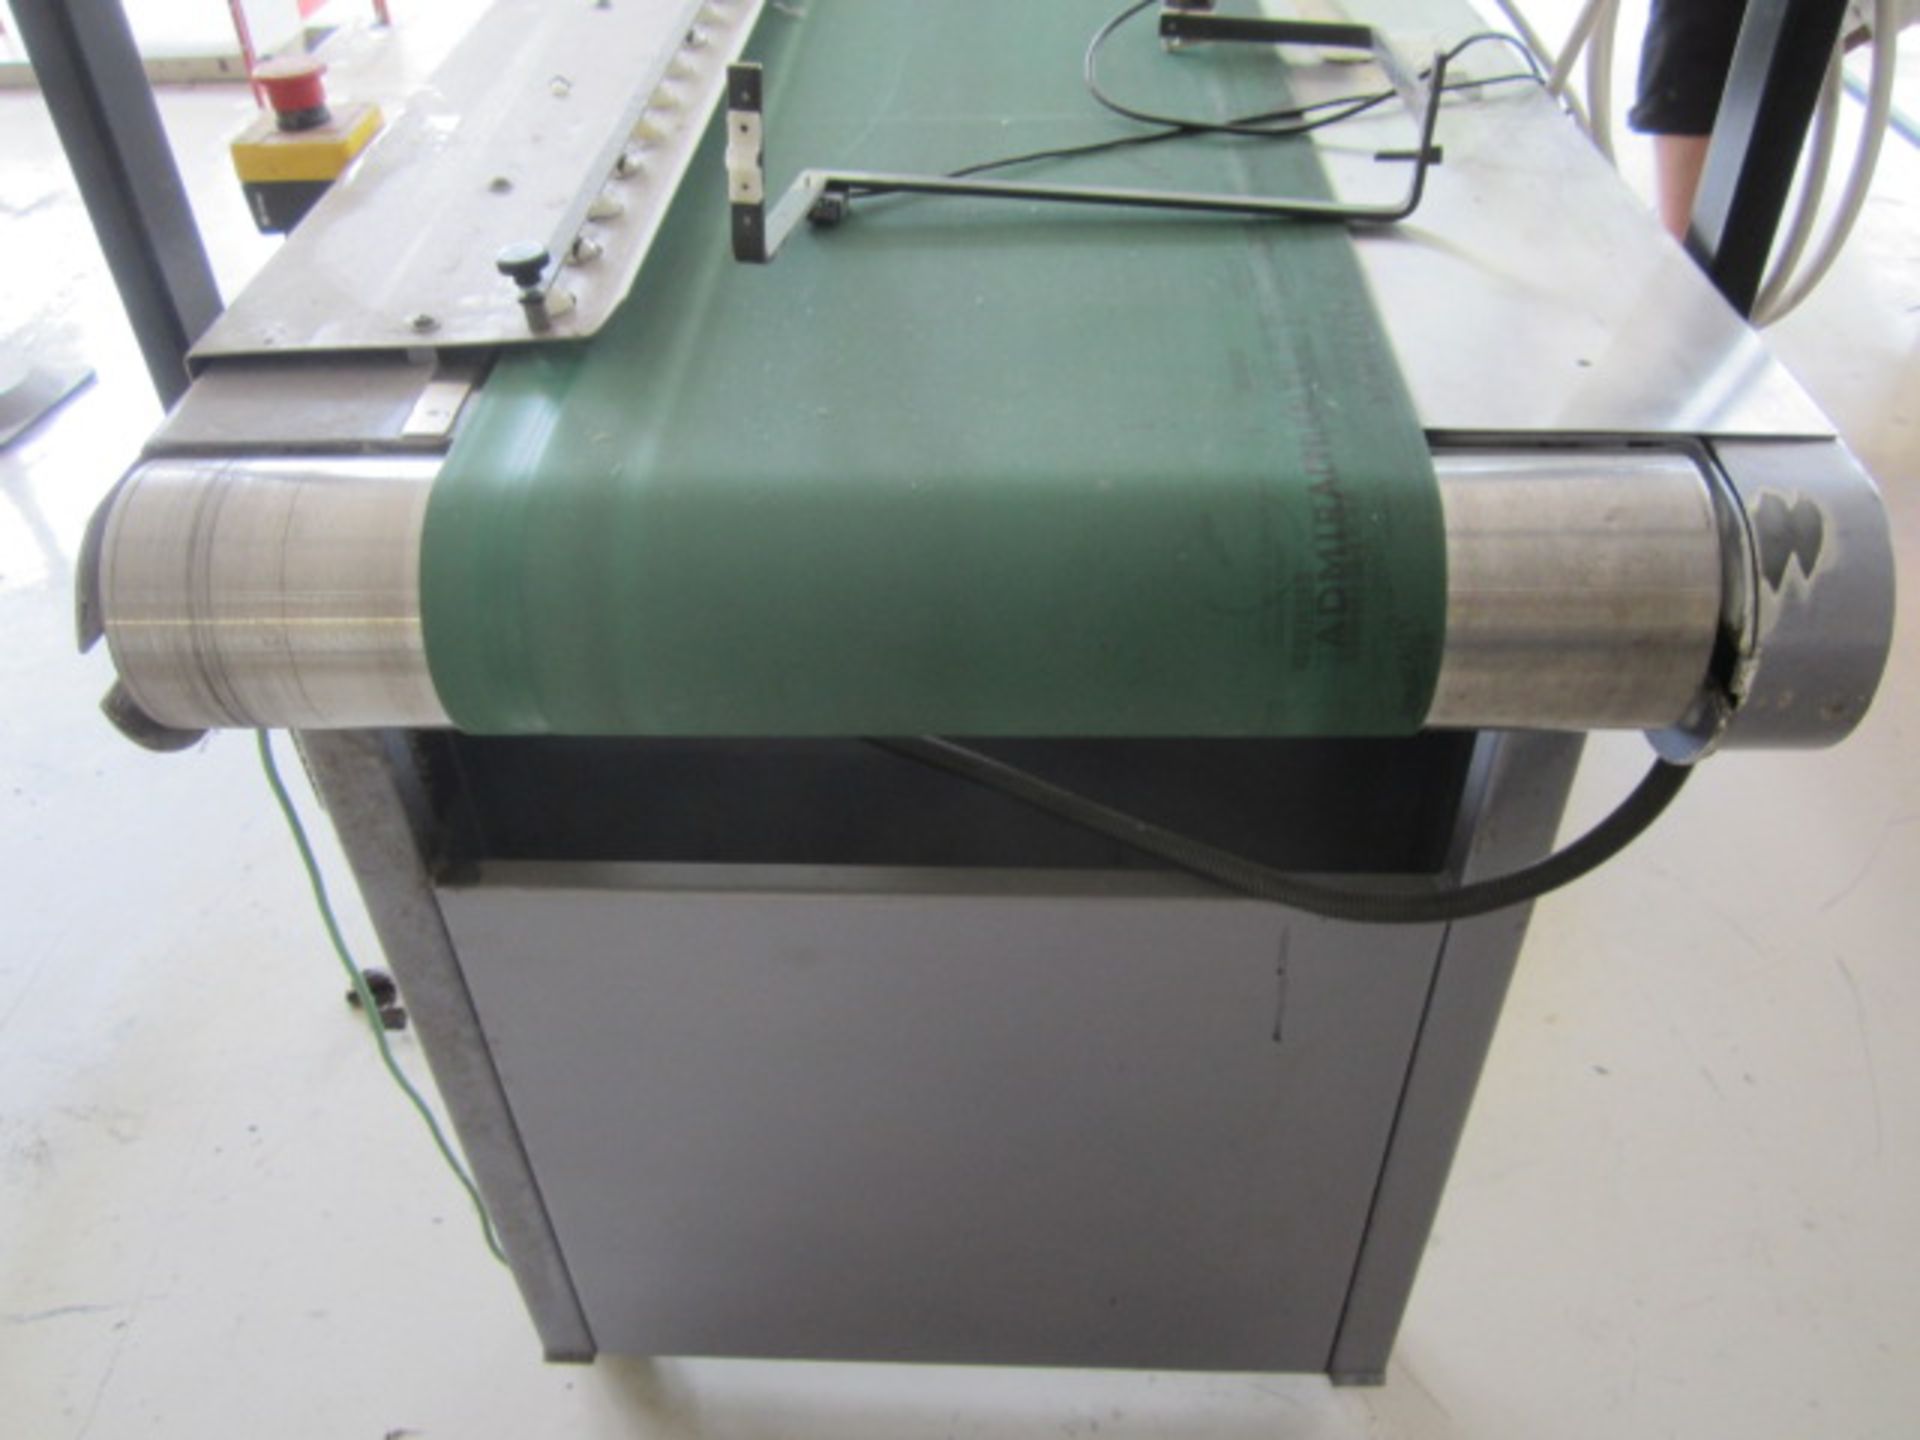 Mobile motorised conveyor, approx. size: 10' x 15" with spare motor drum. - Lift out charge to be - Image 6 of 7